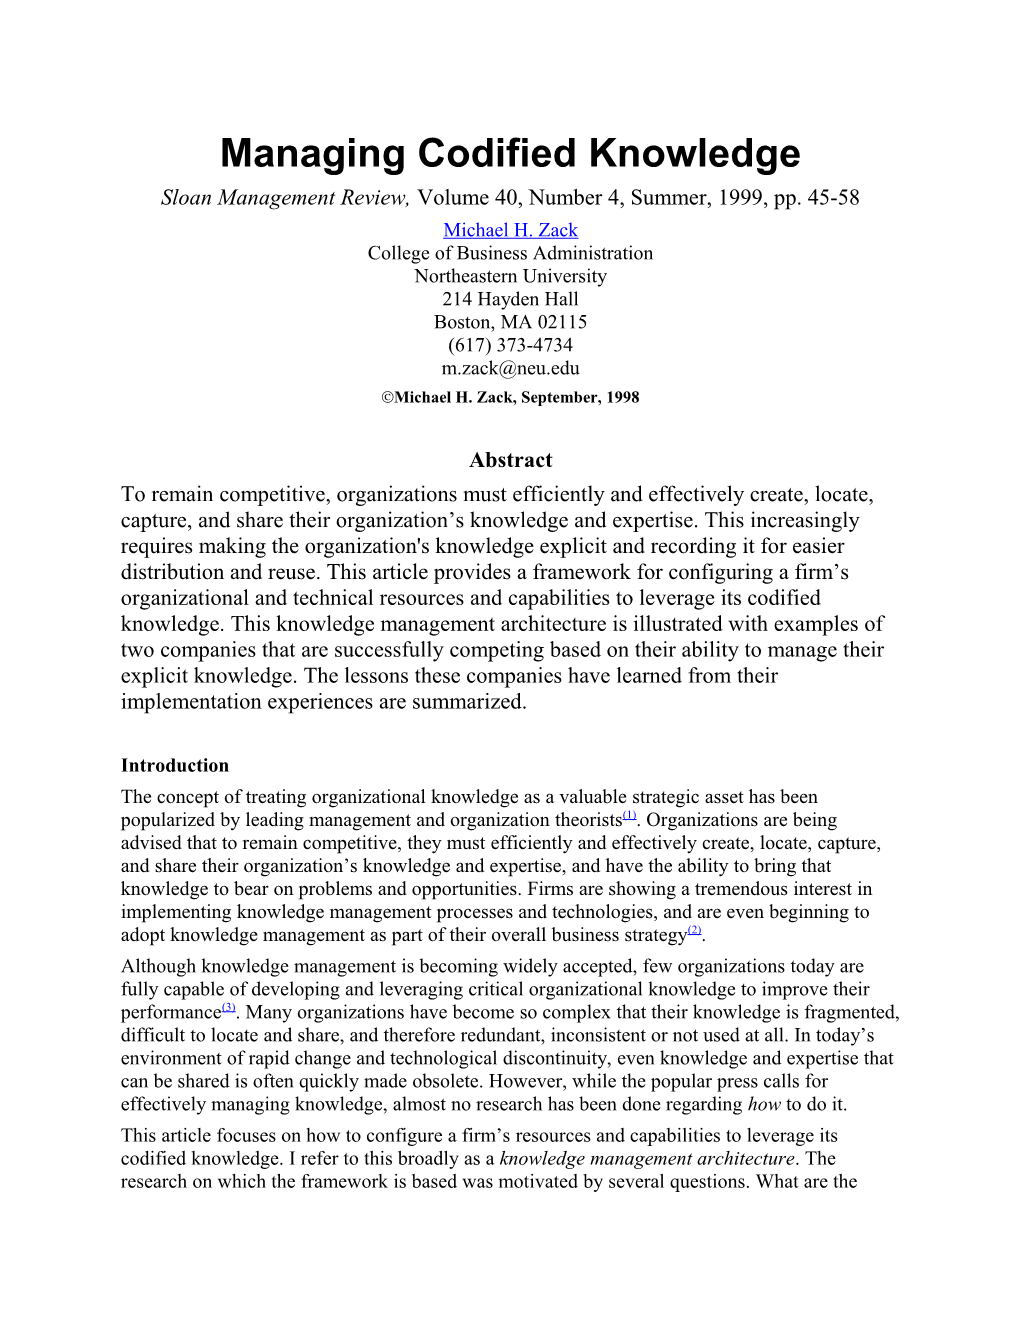 Managing Codified Knowledge